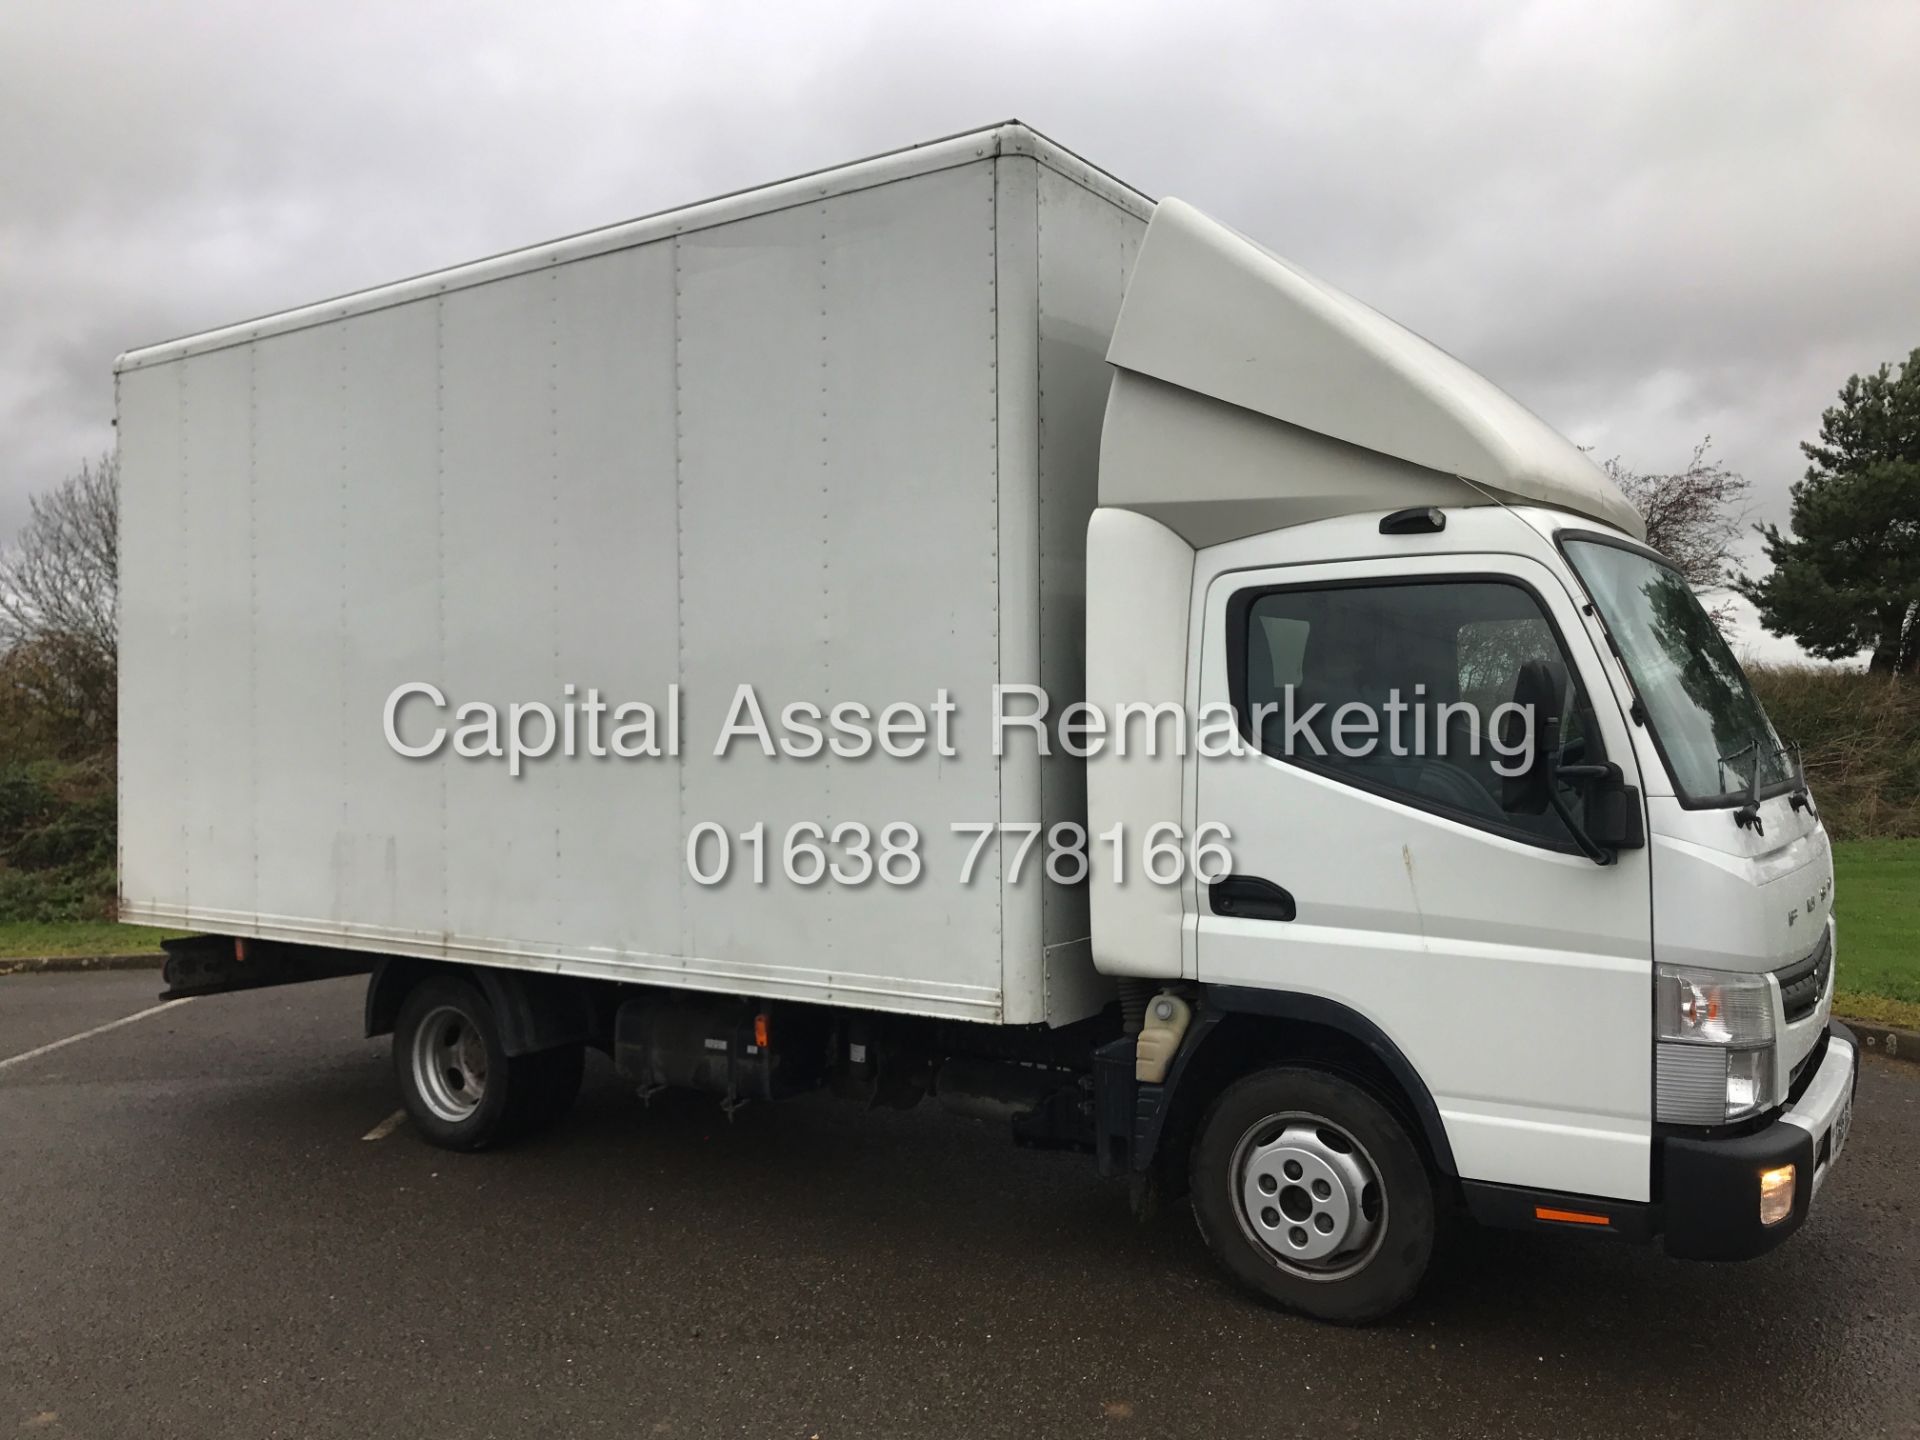 (ON SALE) MITSUBISHI FUSO CANTER 3.0D 3C13 (15 REG-NEW SHAPE) 15 FOOT BODY- 1 OWNER *IDEAL REMOVALS* - Image 5 of 17